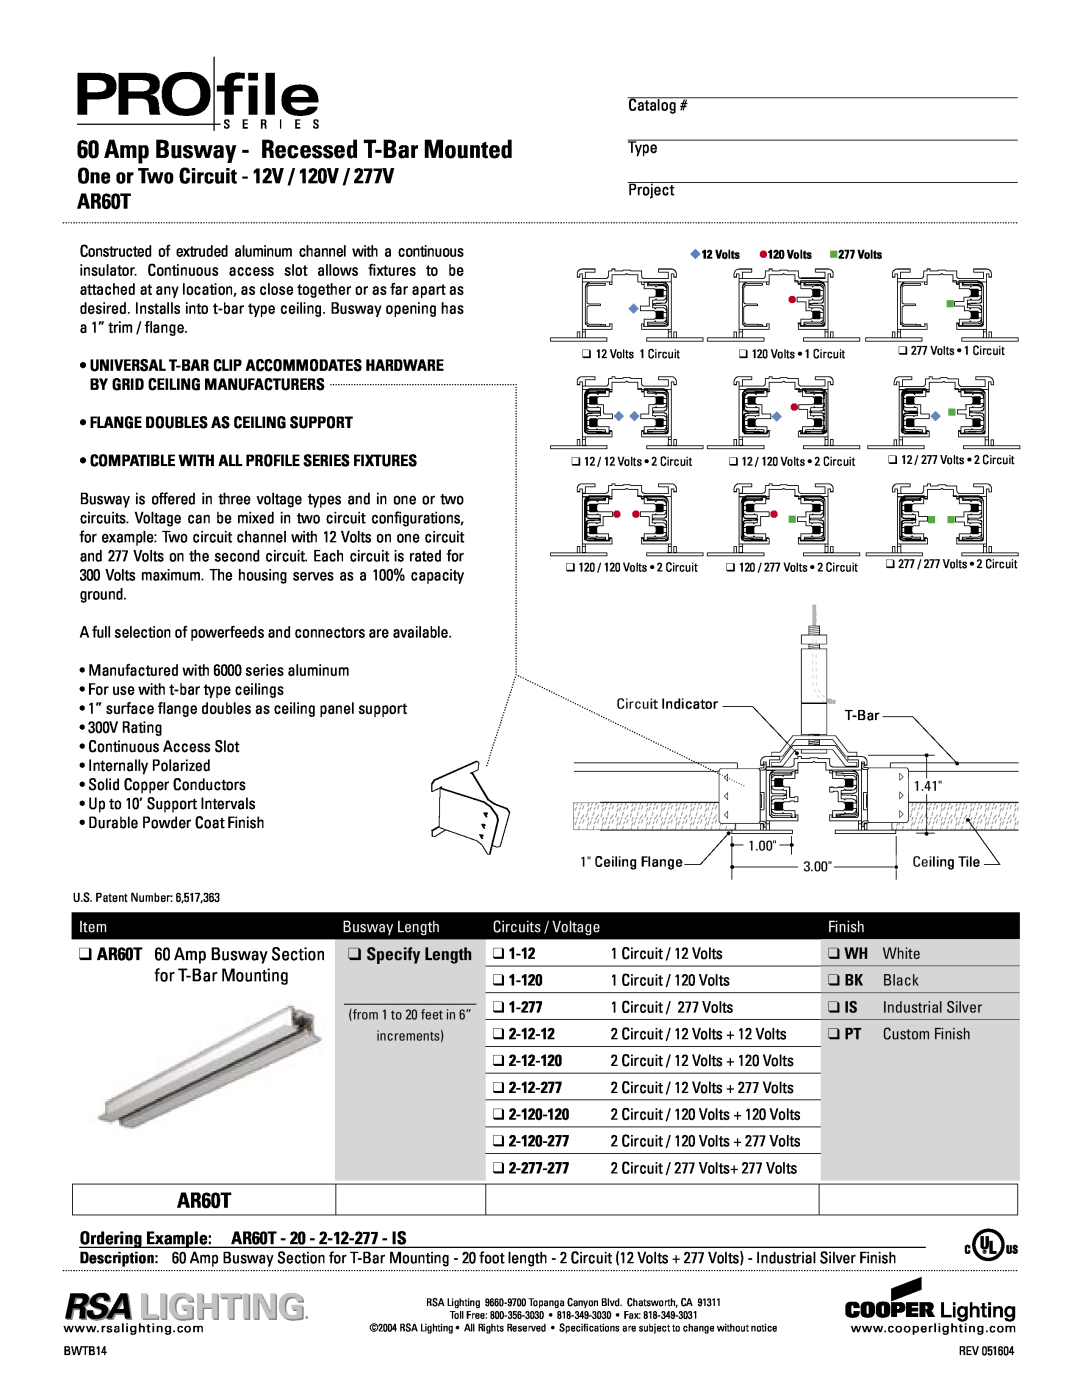 Cooper Lighting specifications Amp Busway - Recessed T-BarMounted, One or Two Circuit - 12V / 120V / AR60T, Finish 